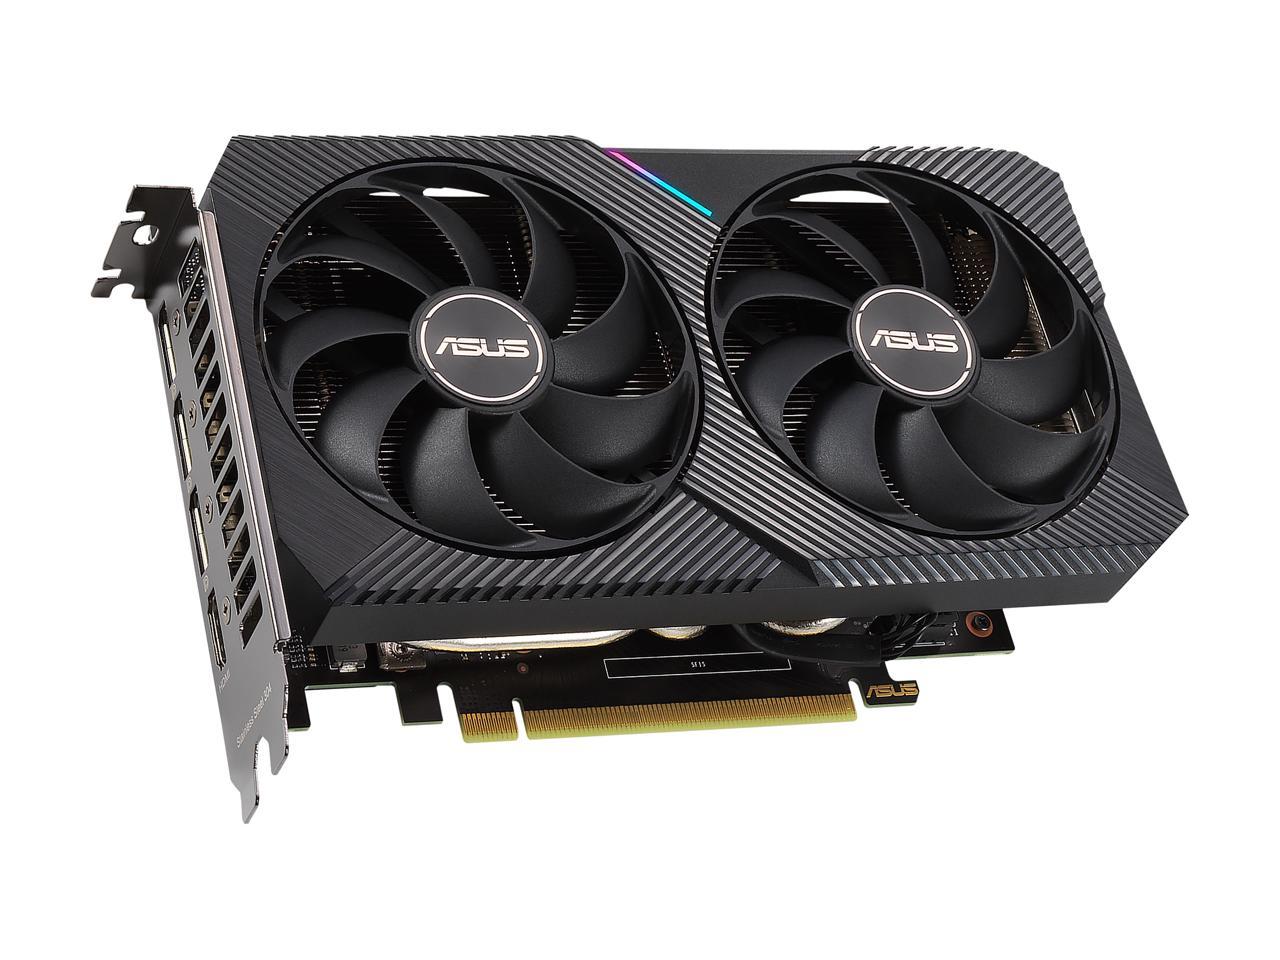 The best graphics cards prices PC gaming in spring 2022 [Updated]